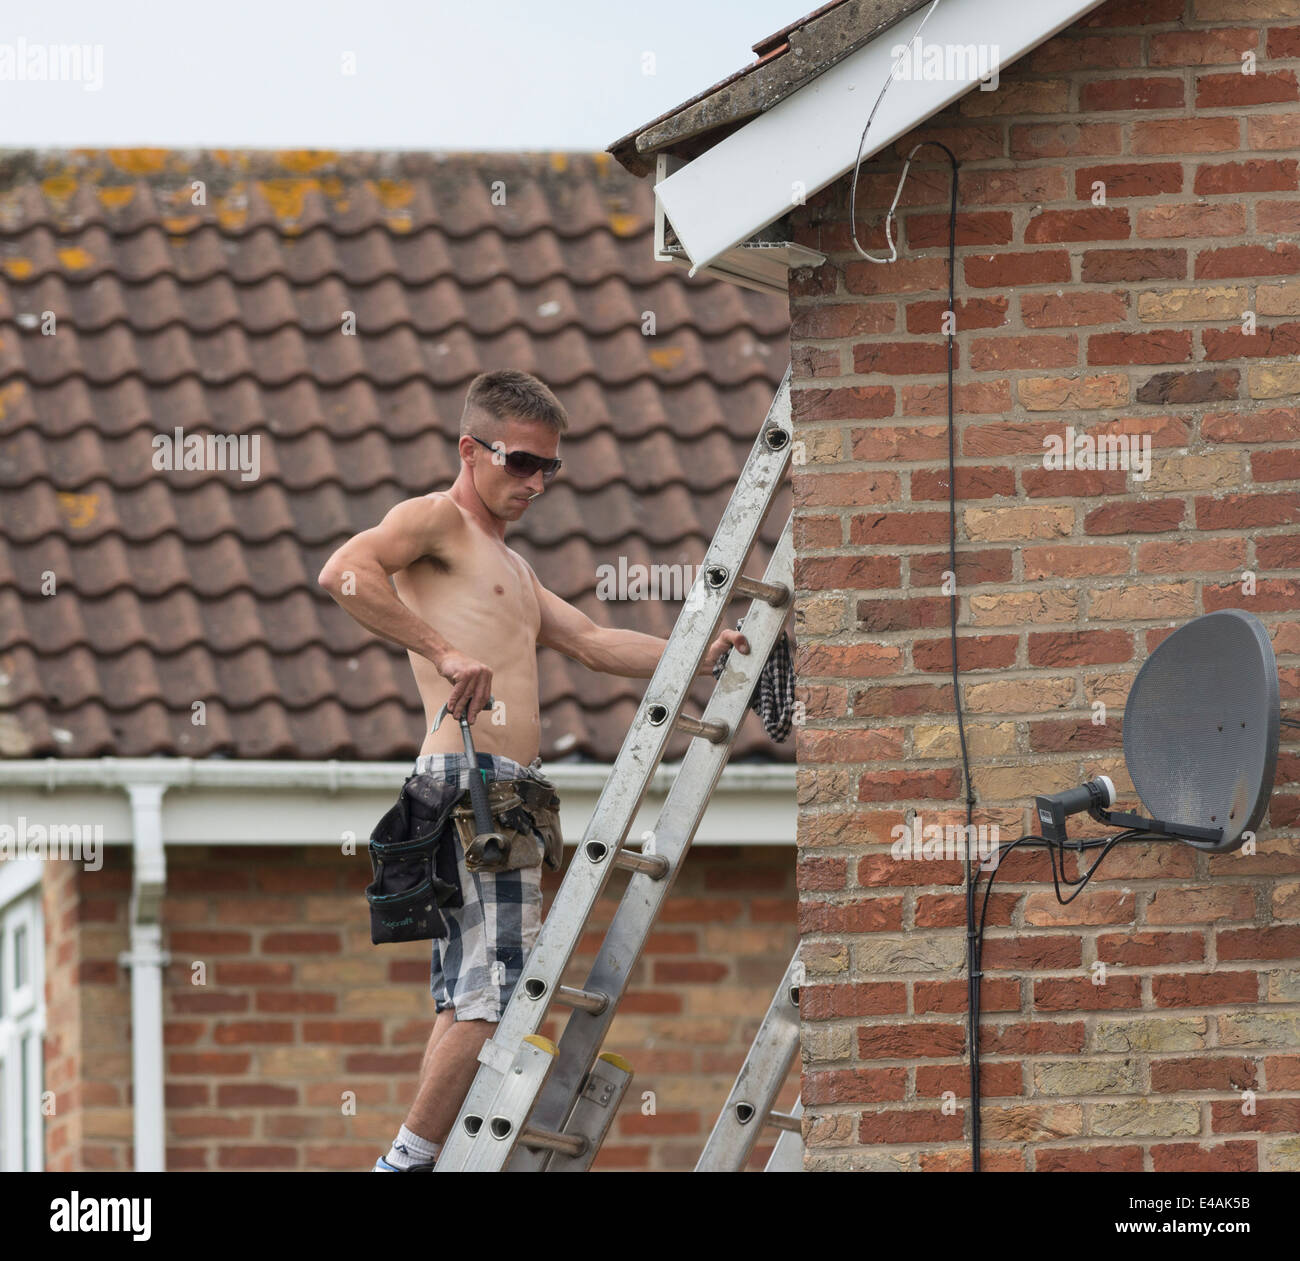 Workman replacing fascia boards on a house roof. Stock Photo